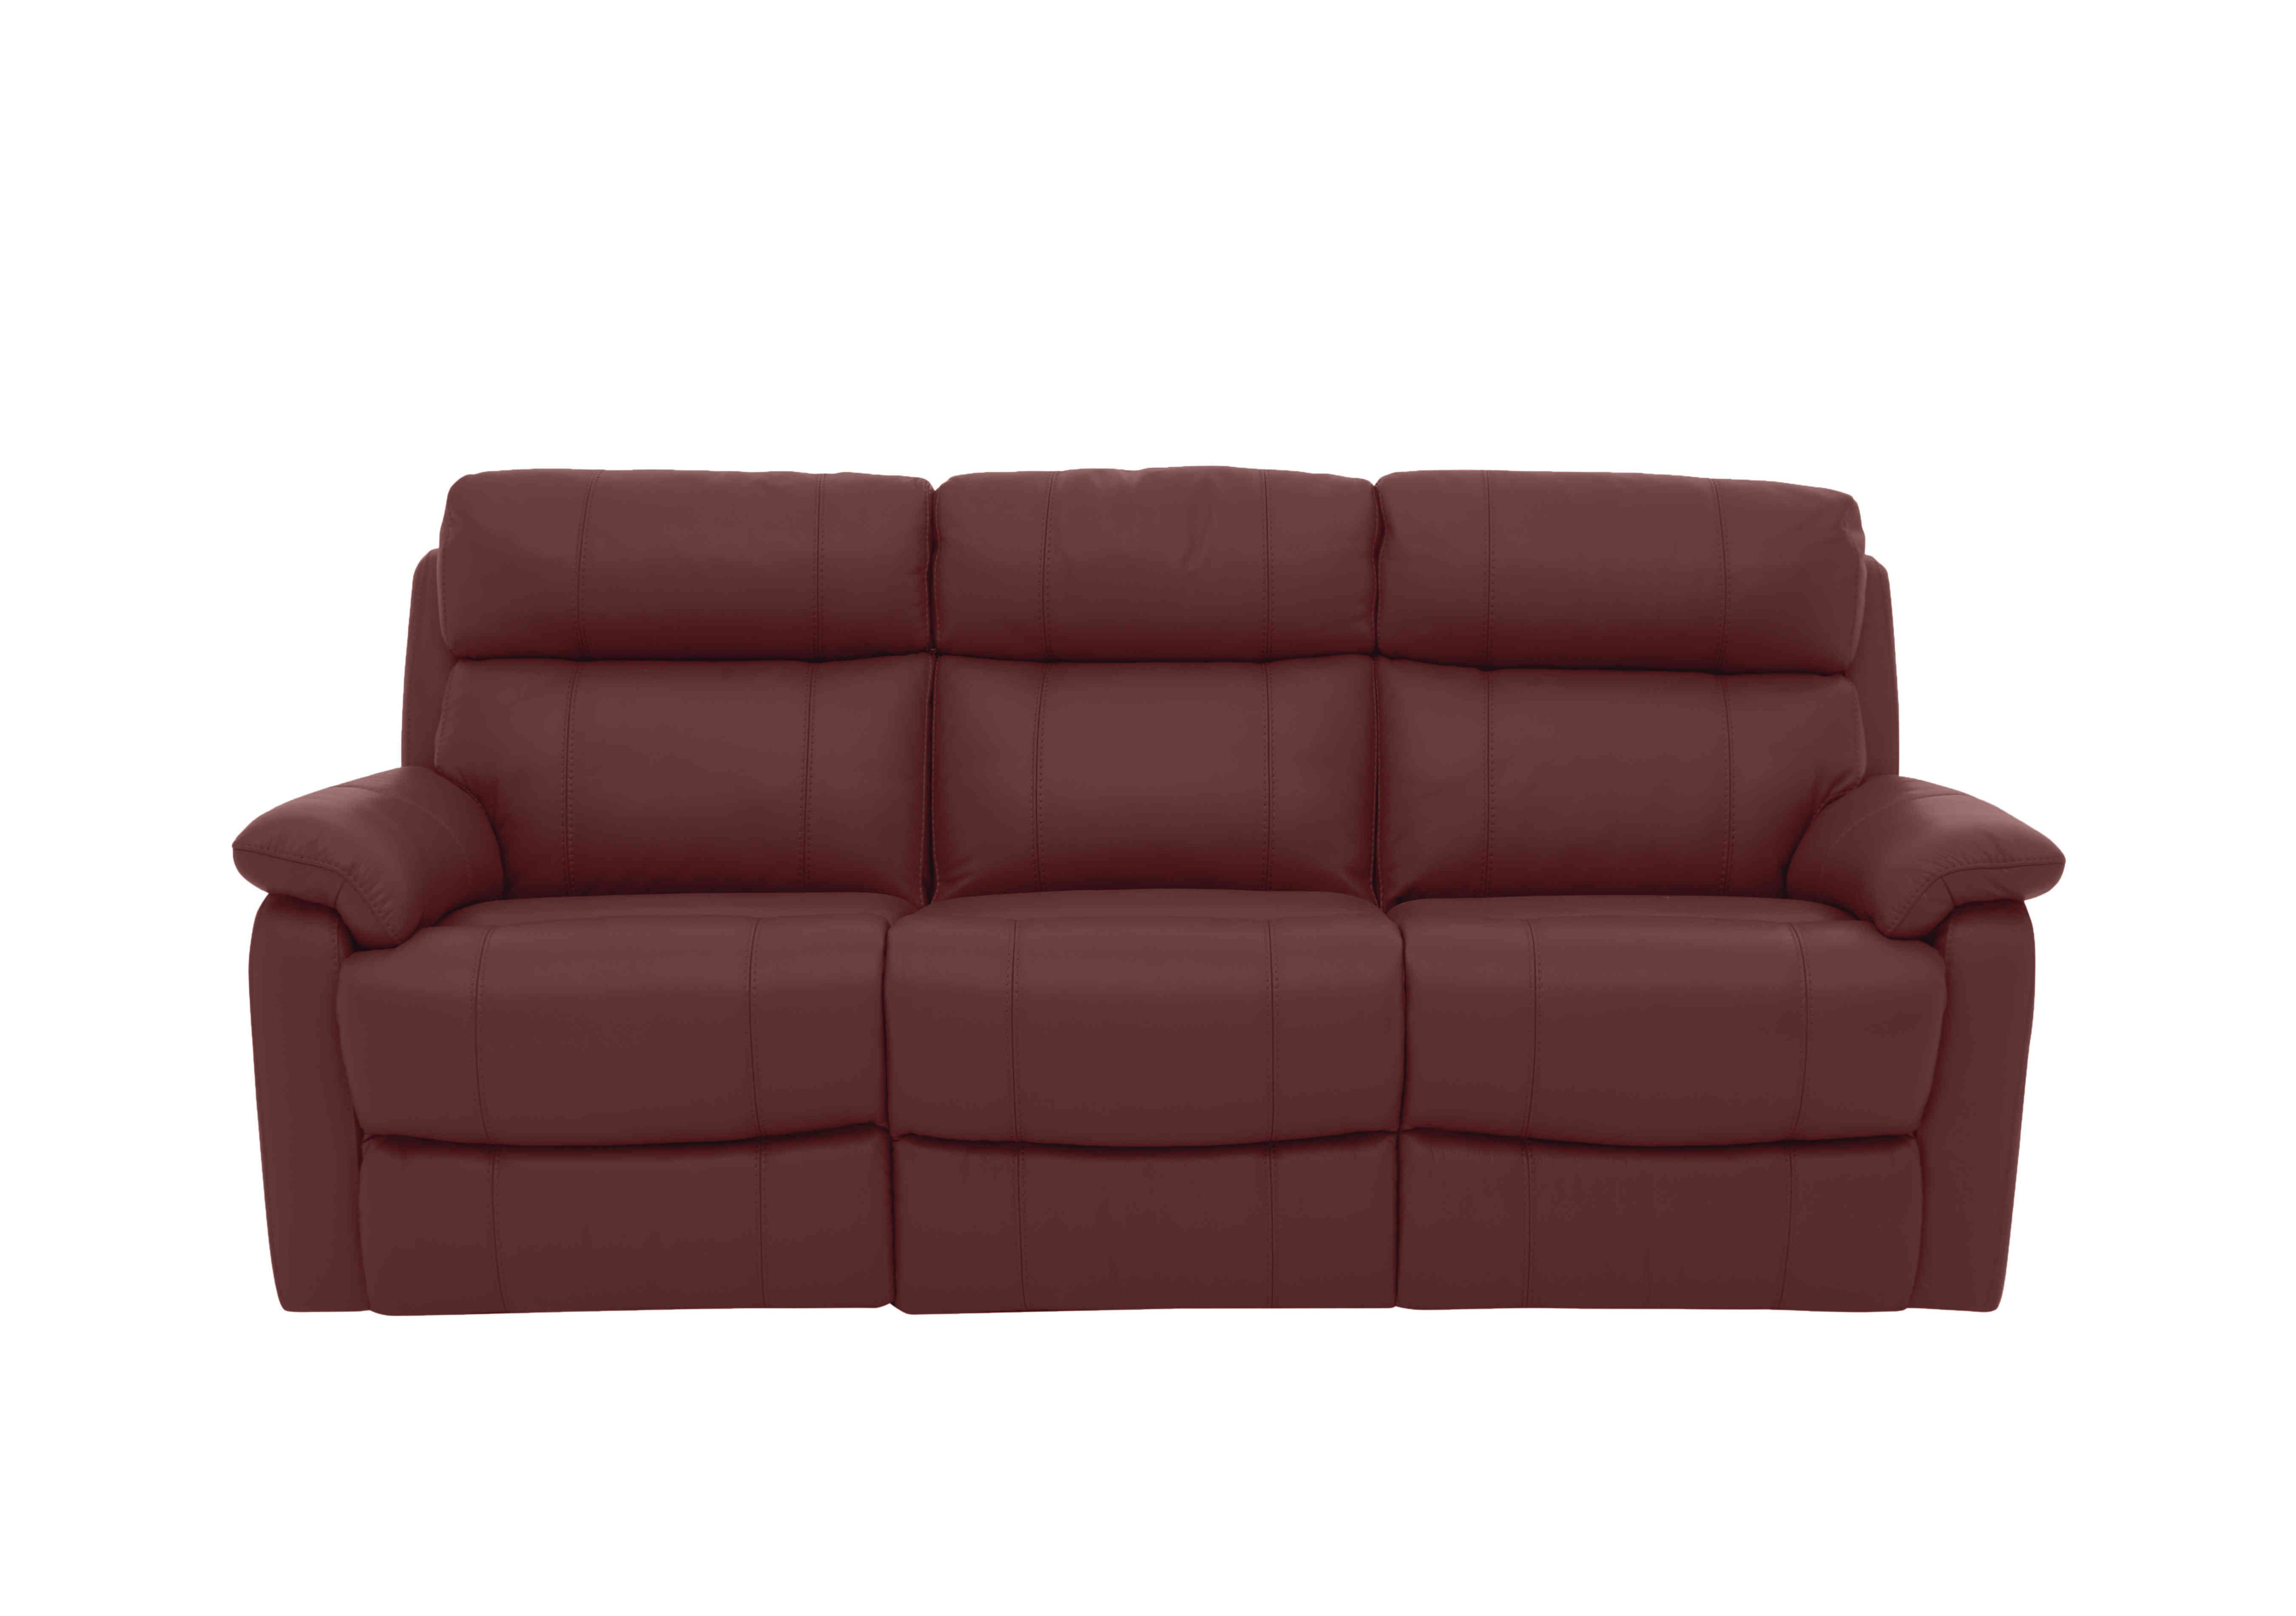 Relax Station Komodo 3 Seater Leather Sofa with Power Headrests and Cup Holders in Bv-035c Deep Red on Furniture Village